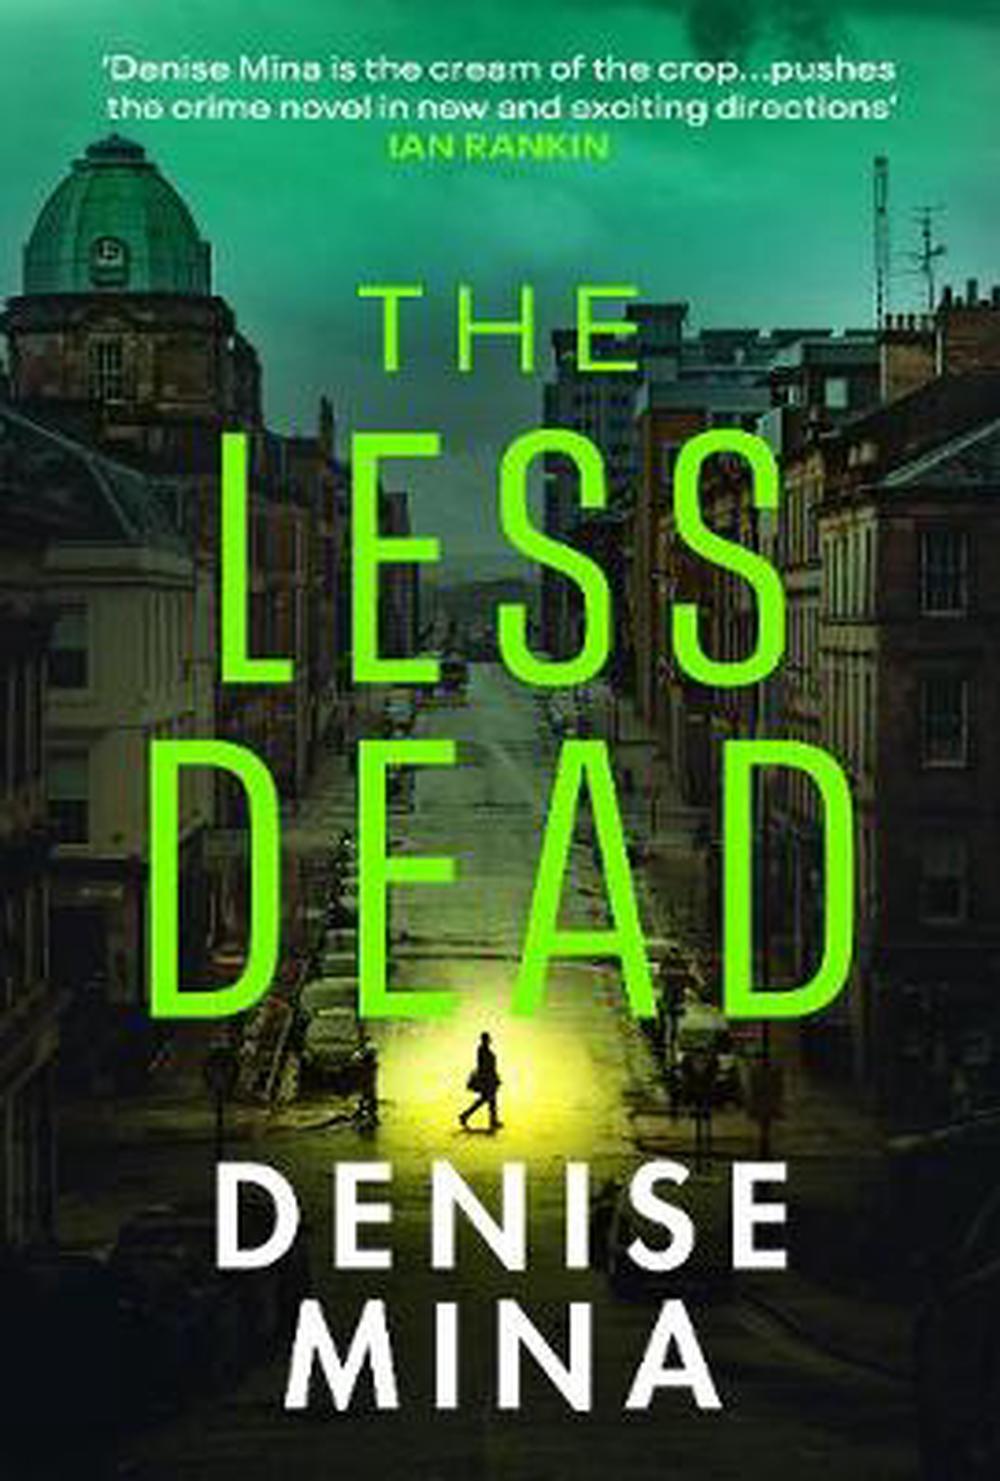 The Less Dead by Denise Mina, Hardcover, 9781787301726 | Buy online at ...